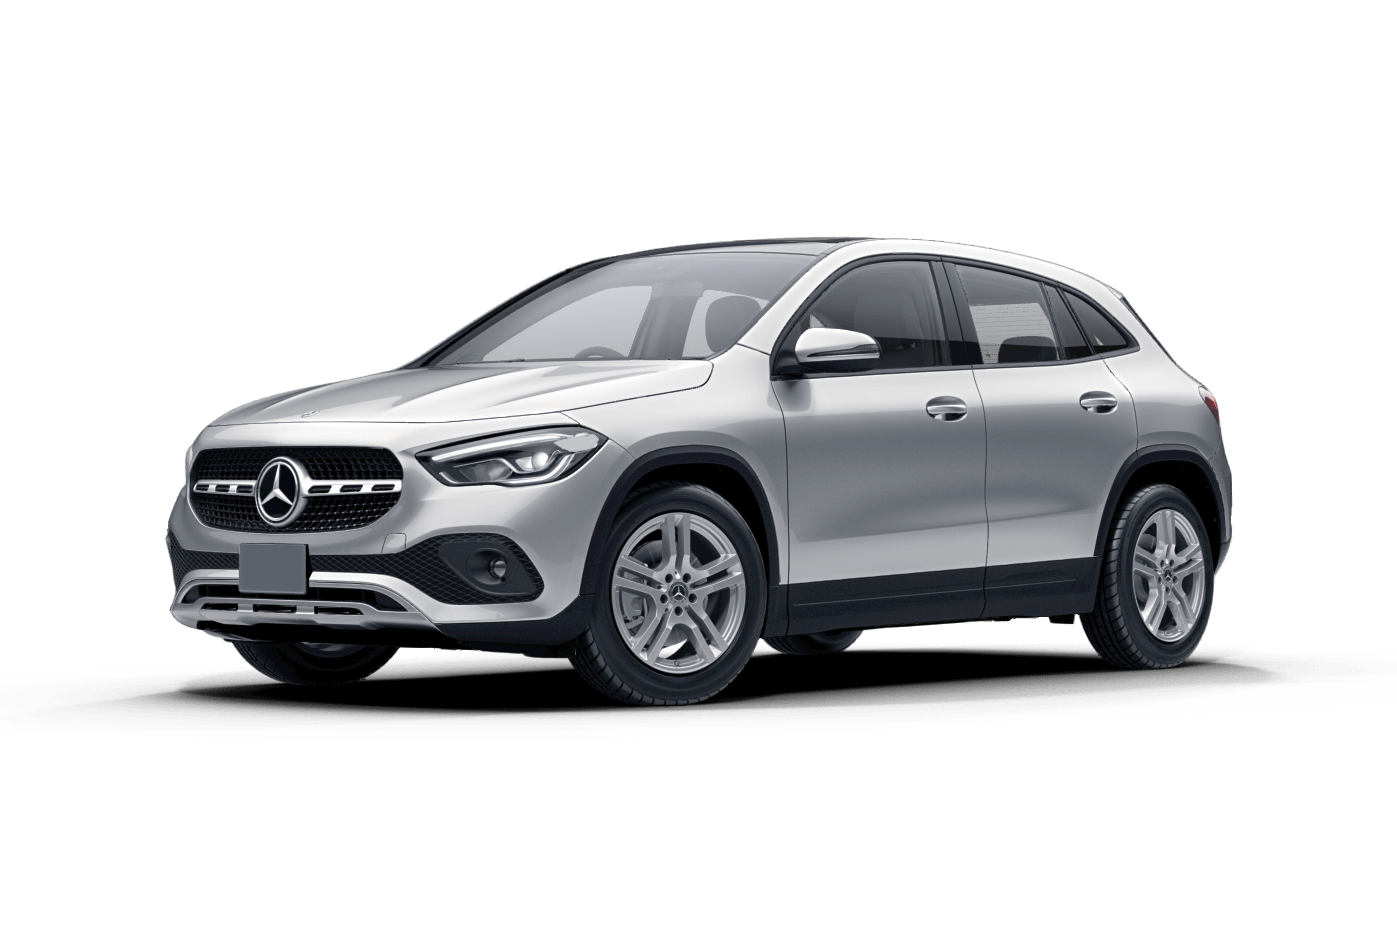 Mercedes-Benz GLA-Class Review, For Sale, Specs, Interior, Models & News | CarsGuide